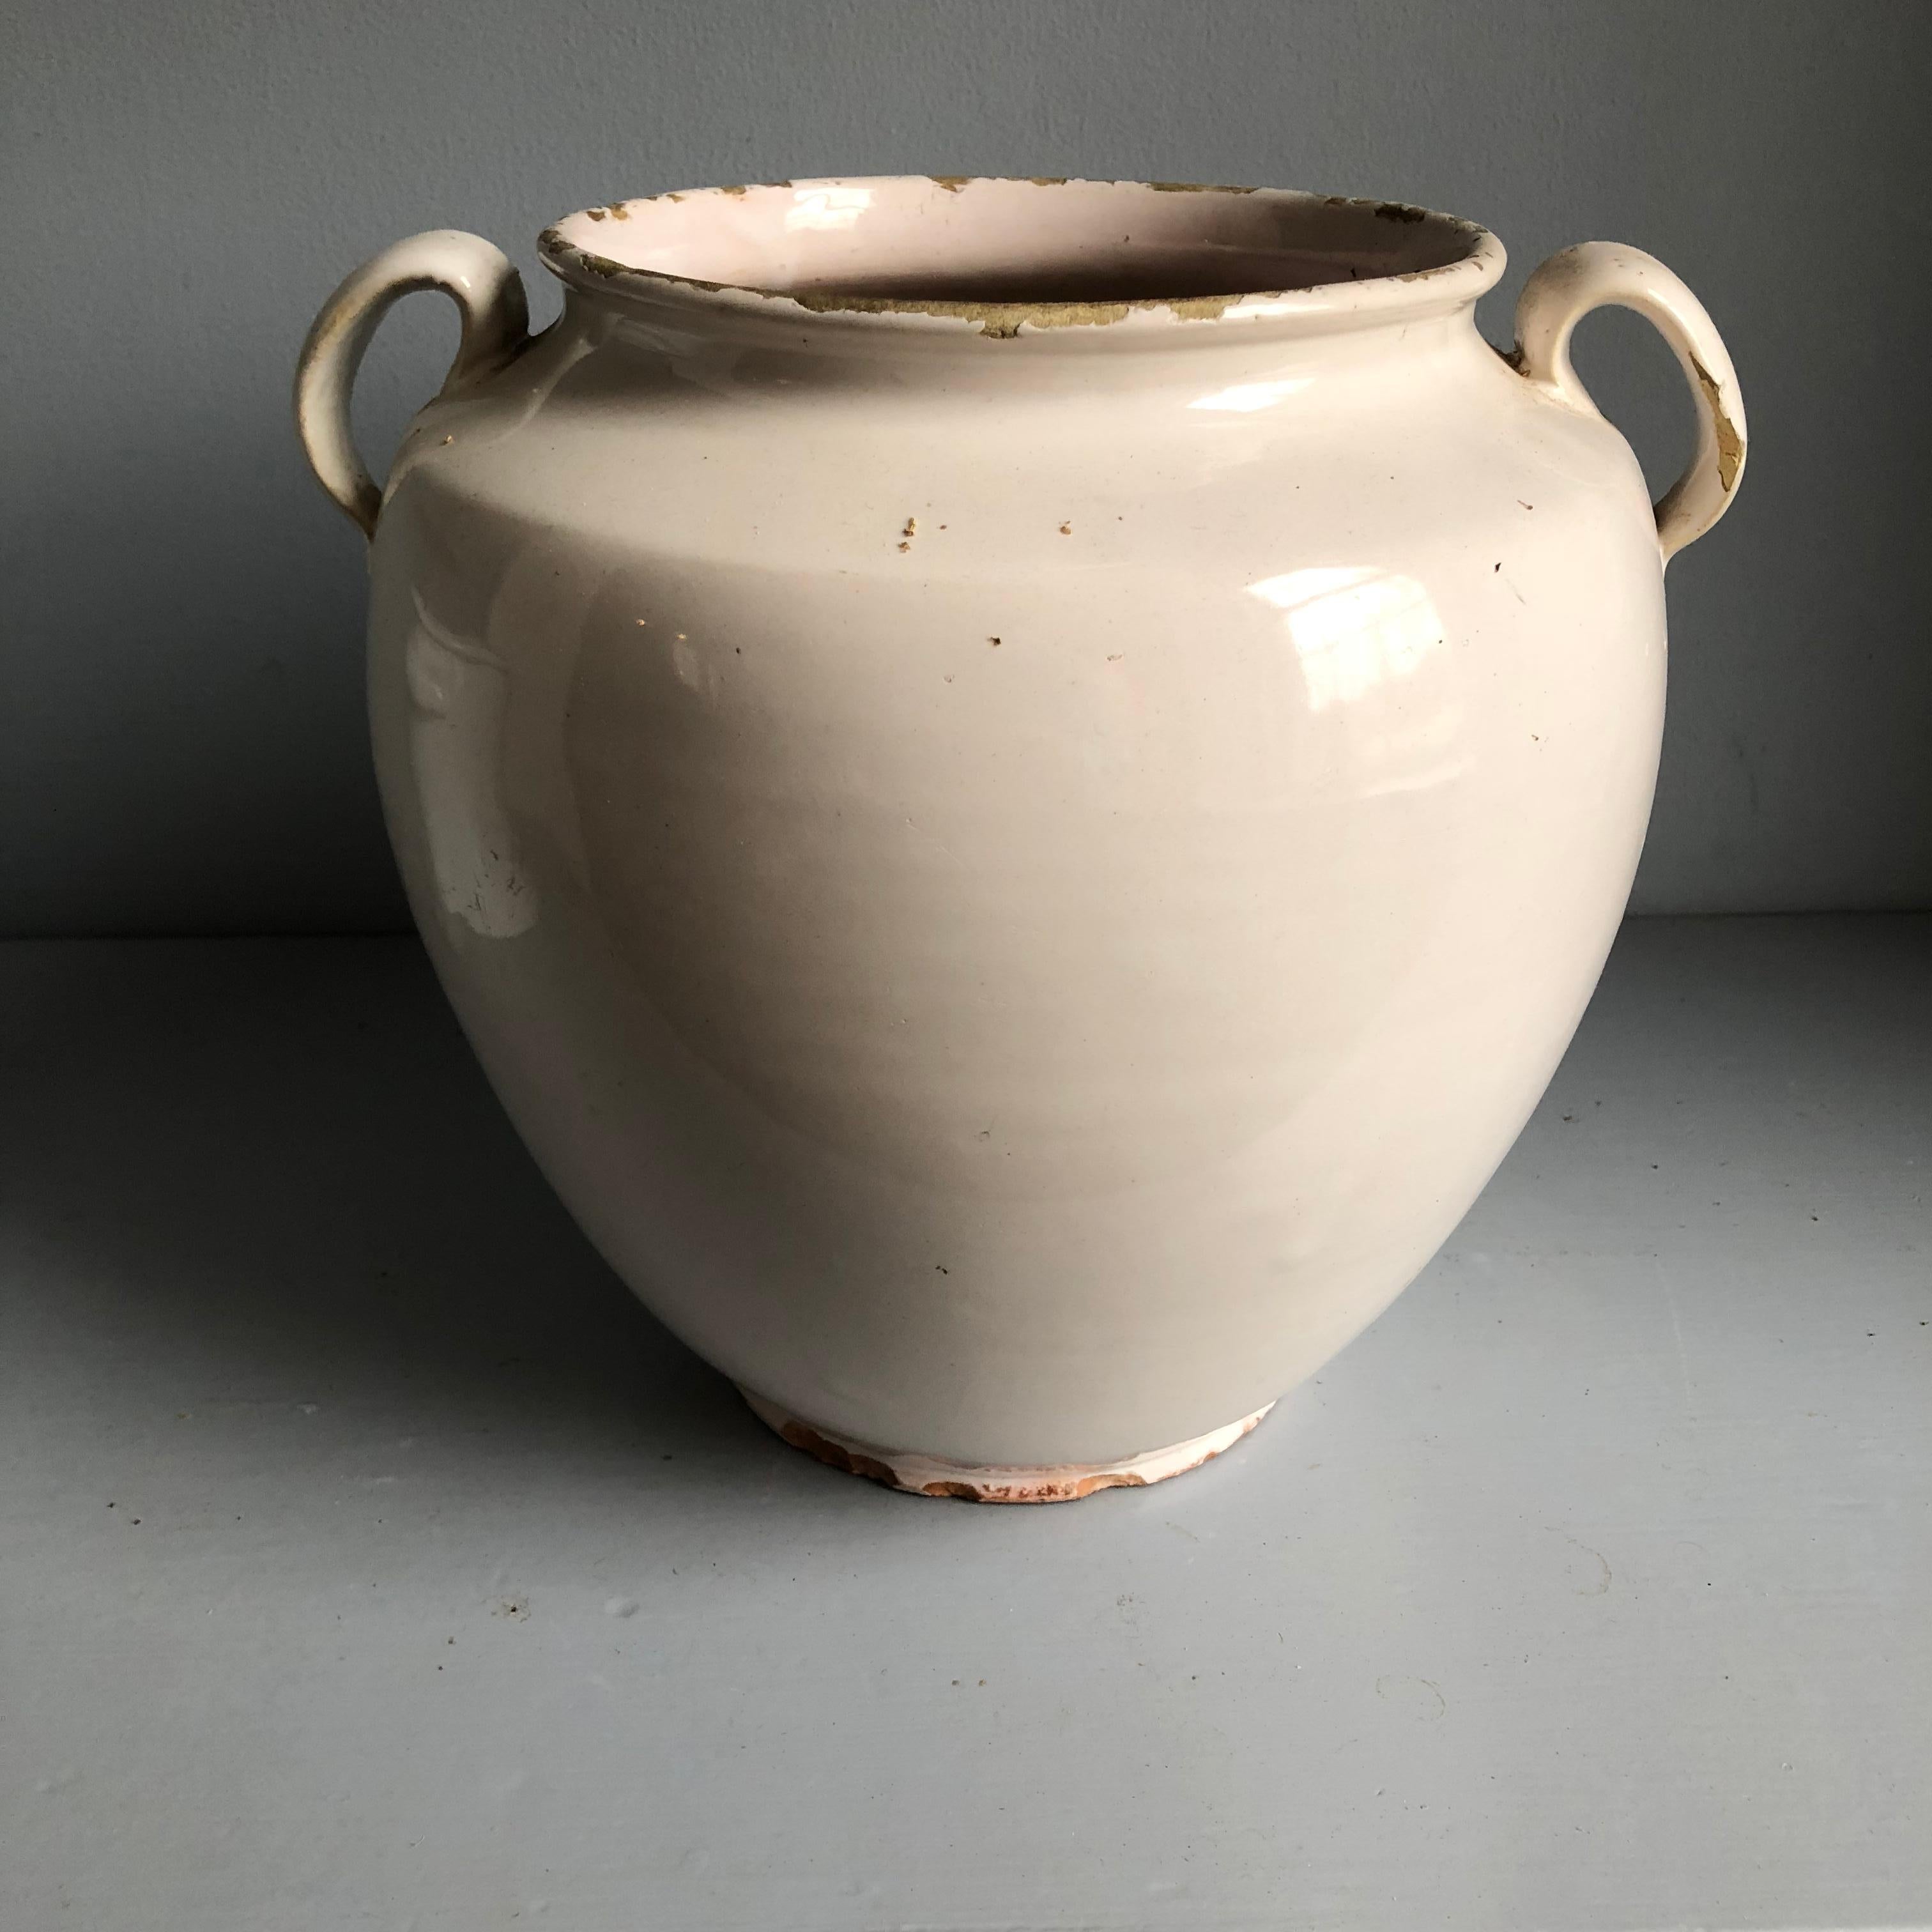 A French Faience white-glazed “confit” pot, with 2 handles, circa 1870.